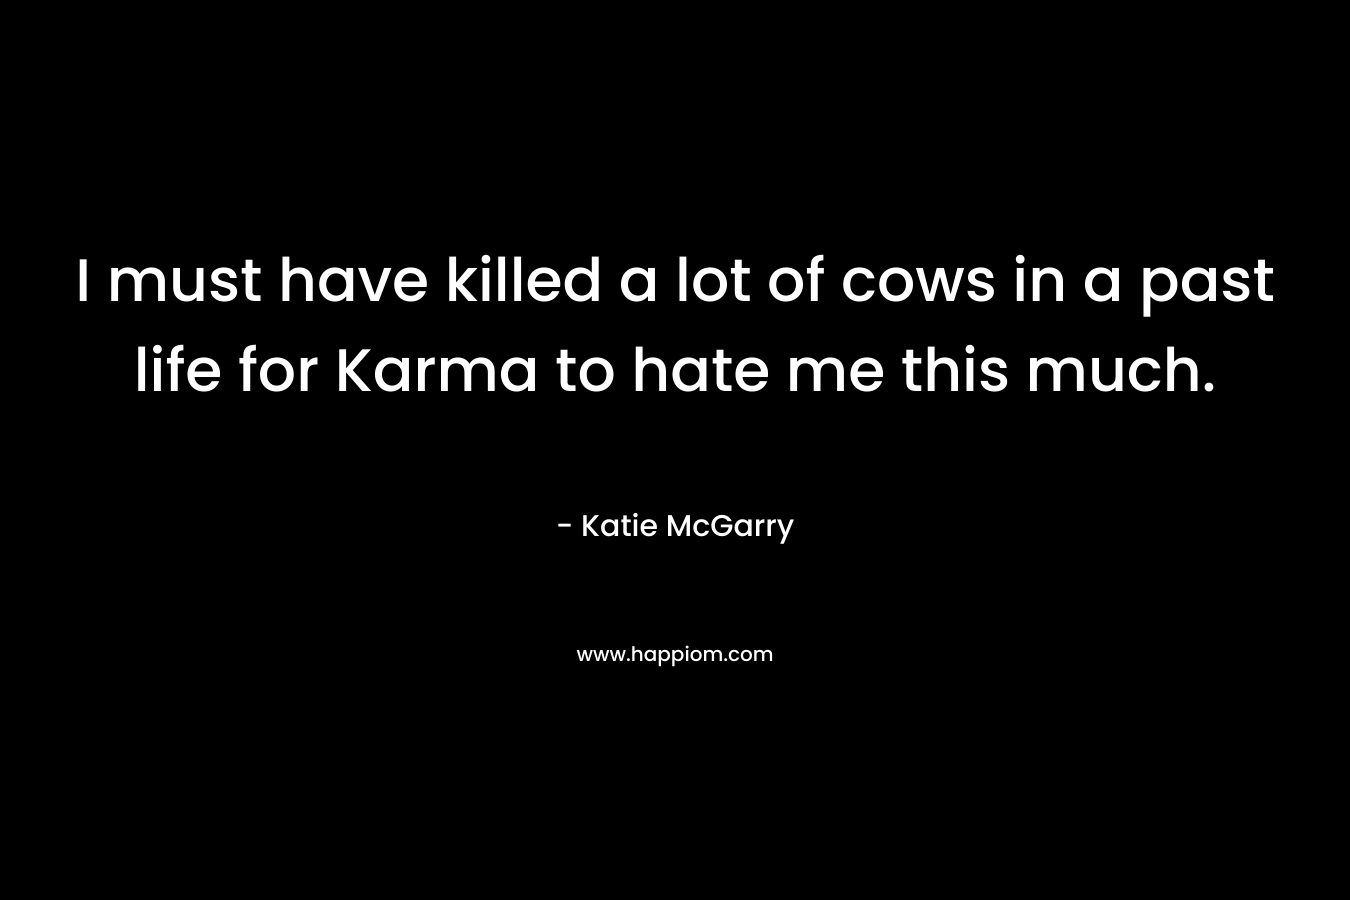 I must have killed a lot of cows in a past life for Karma to hate me this much.